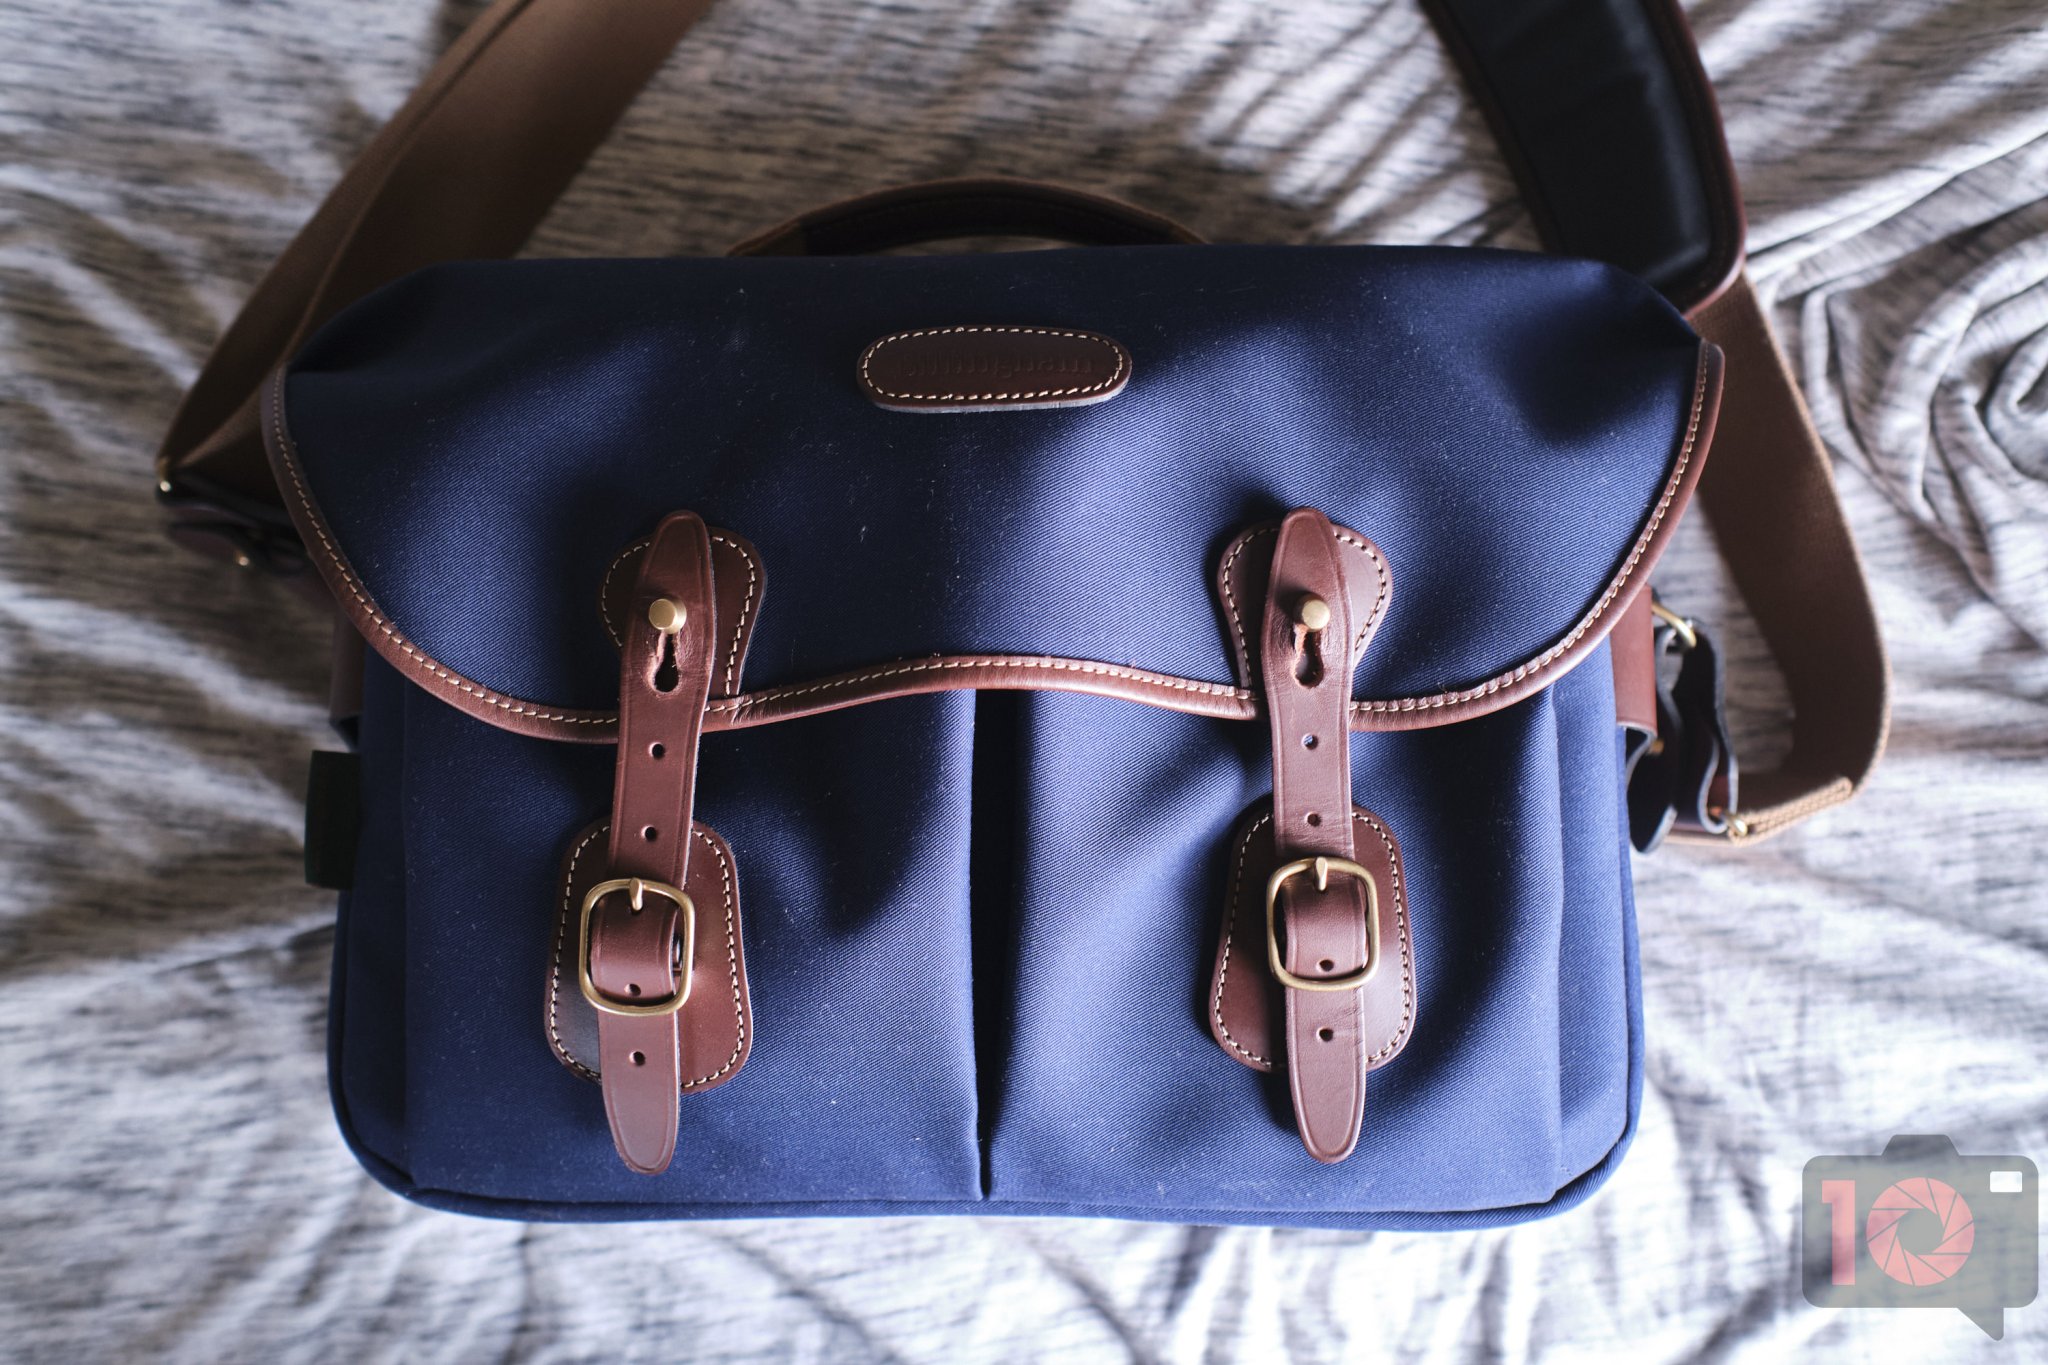 Their Most Gorgeous Bag Yet! Billingham Hadley One Review